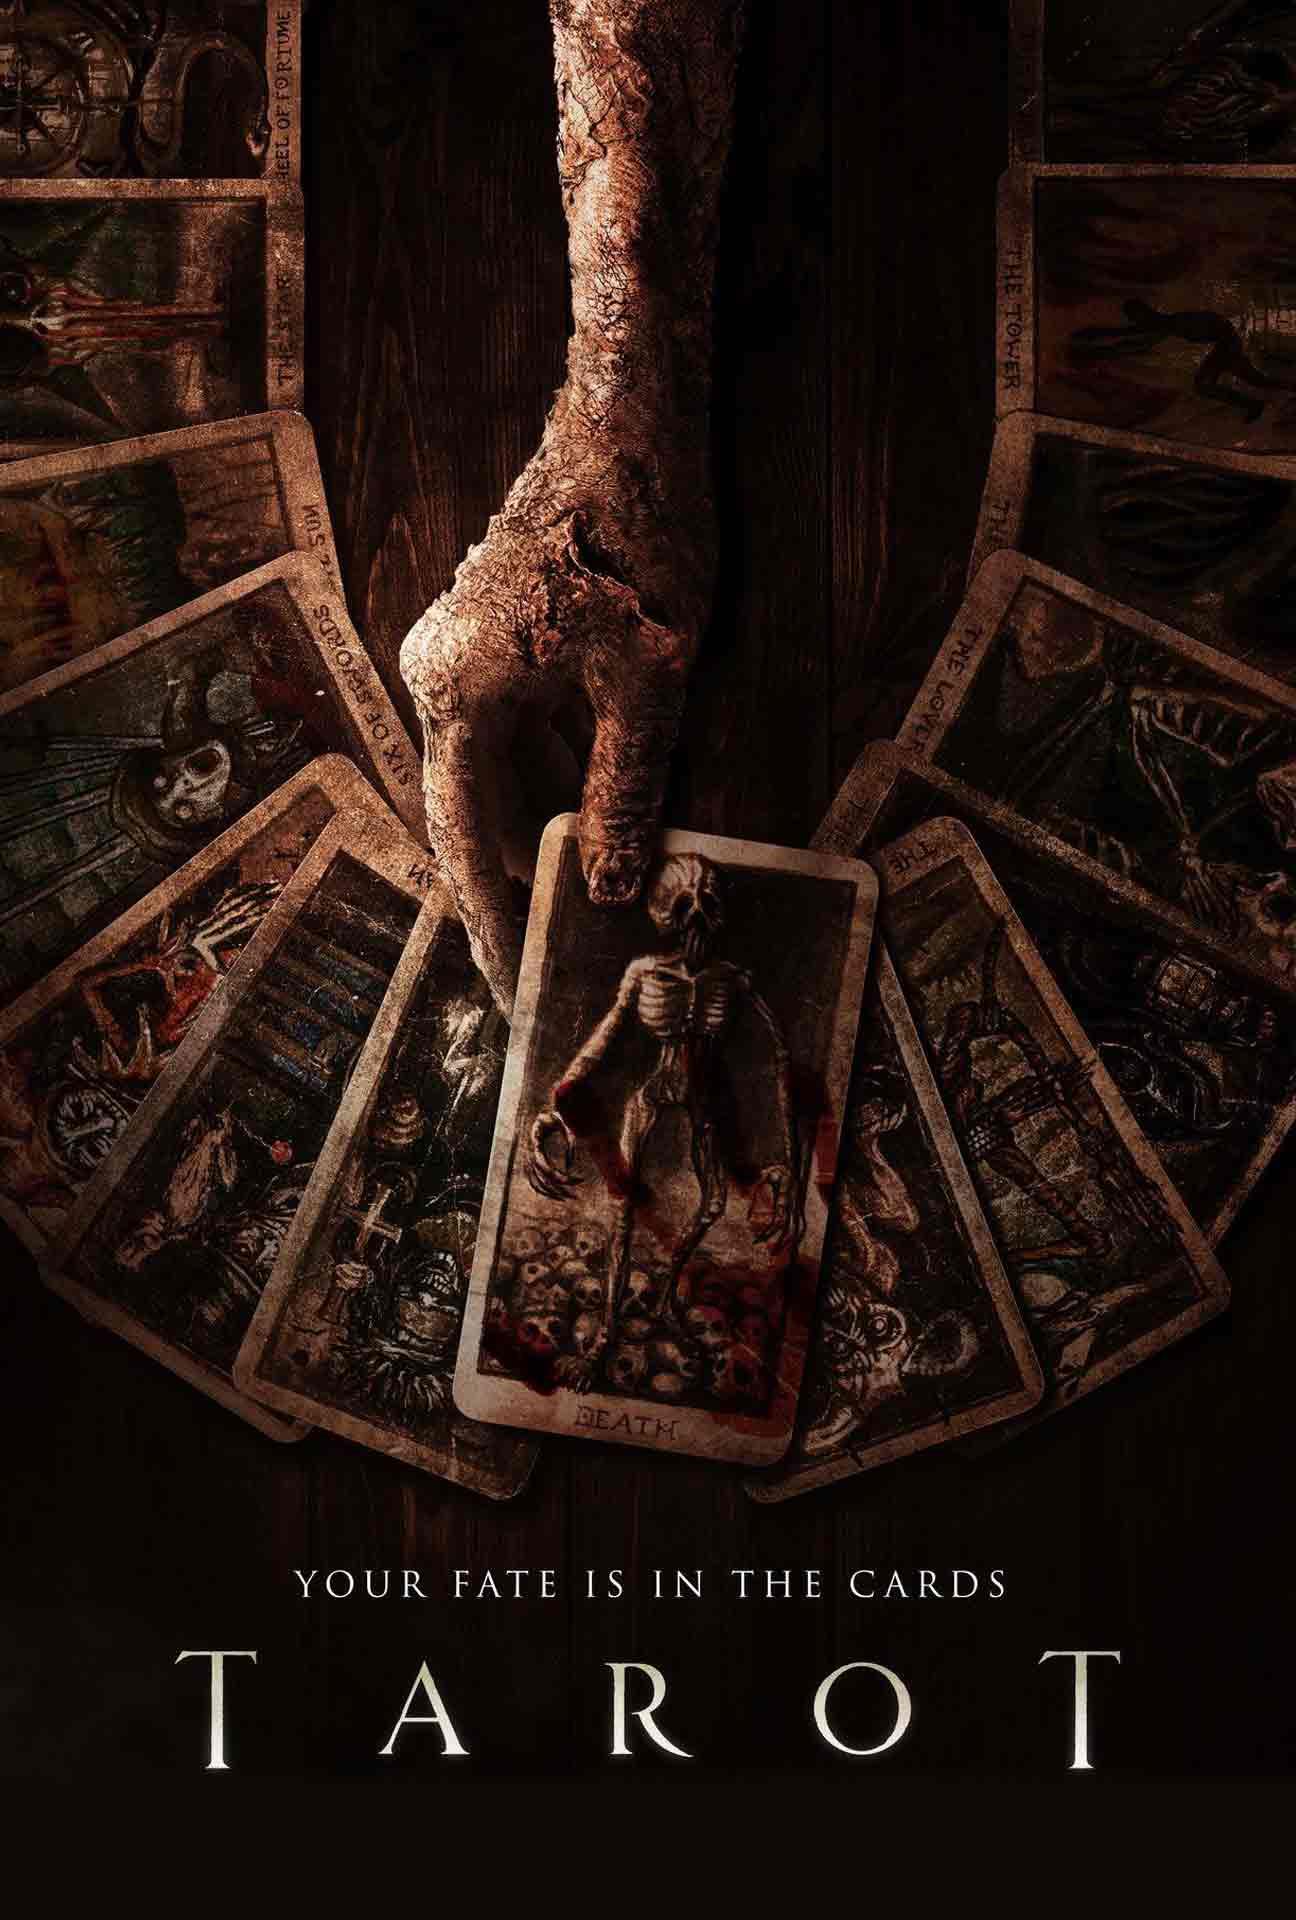 Movie Poster for Tarot